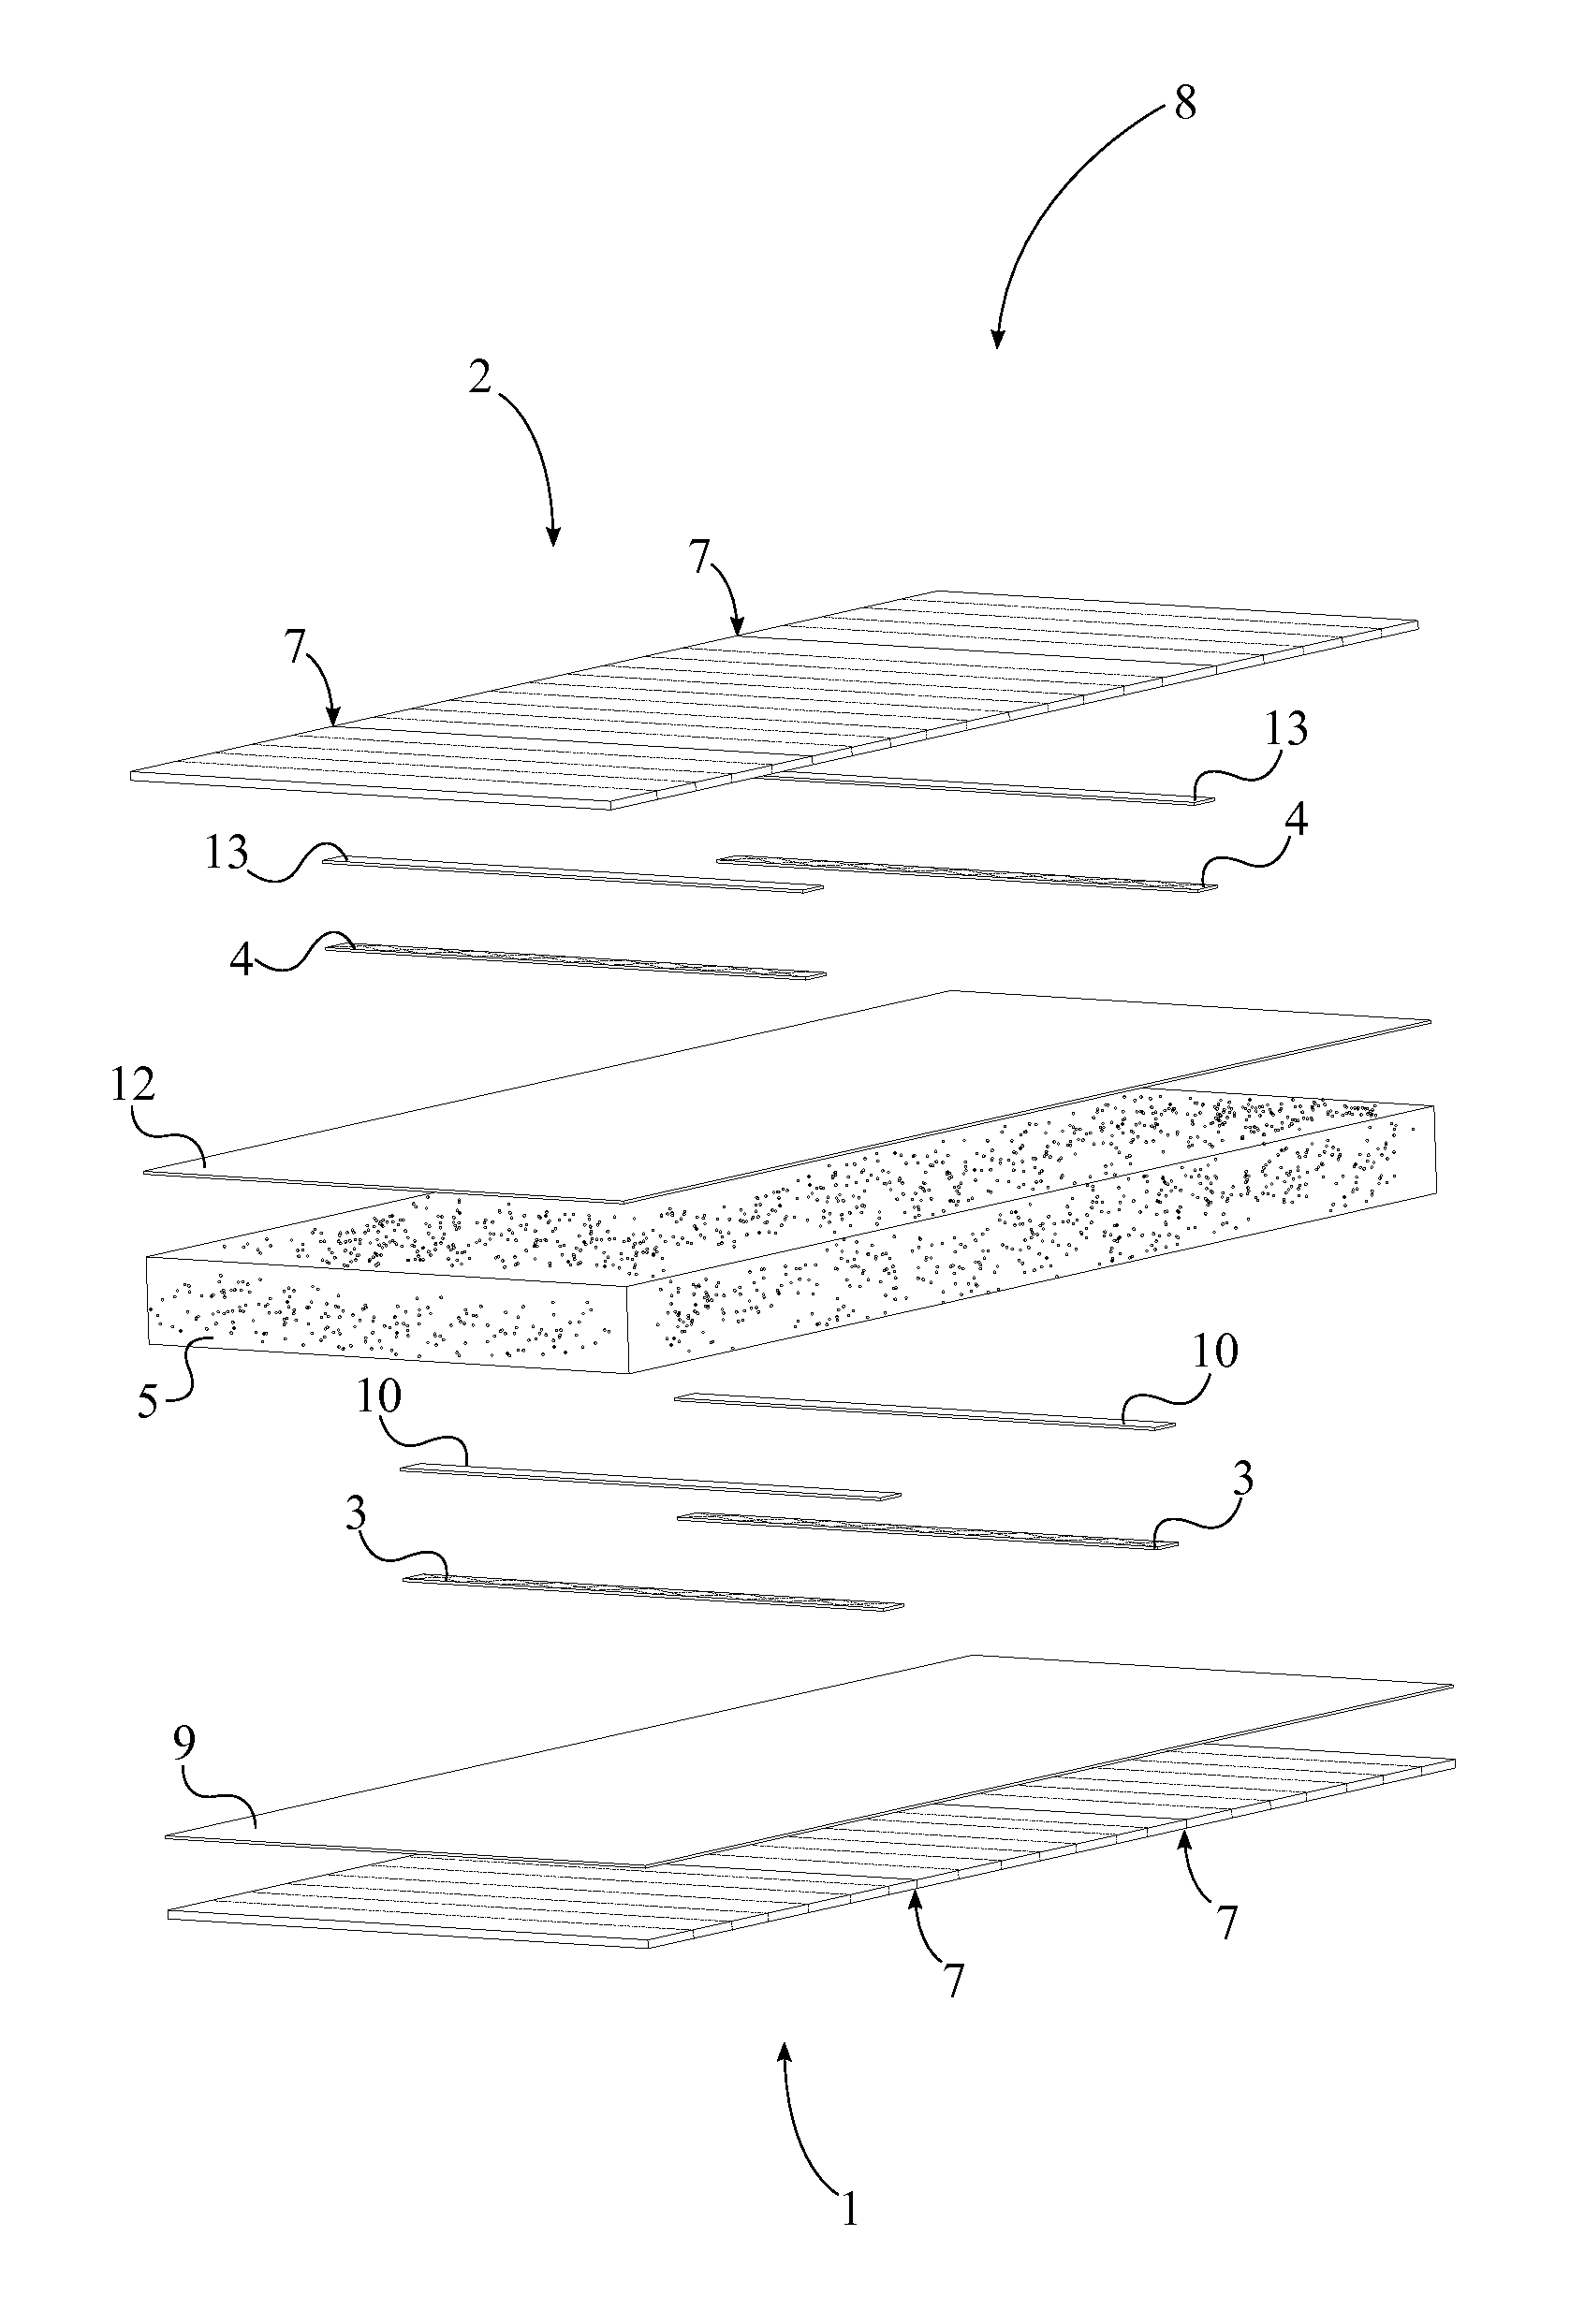 Method for Splicing Stress Skins used for Manufacturing Structural Insulated Panels